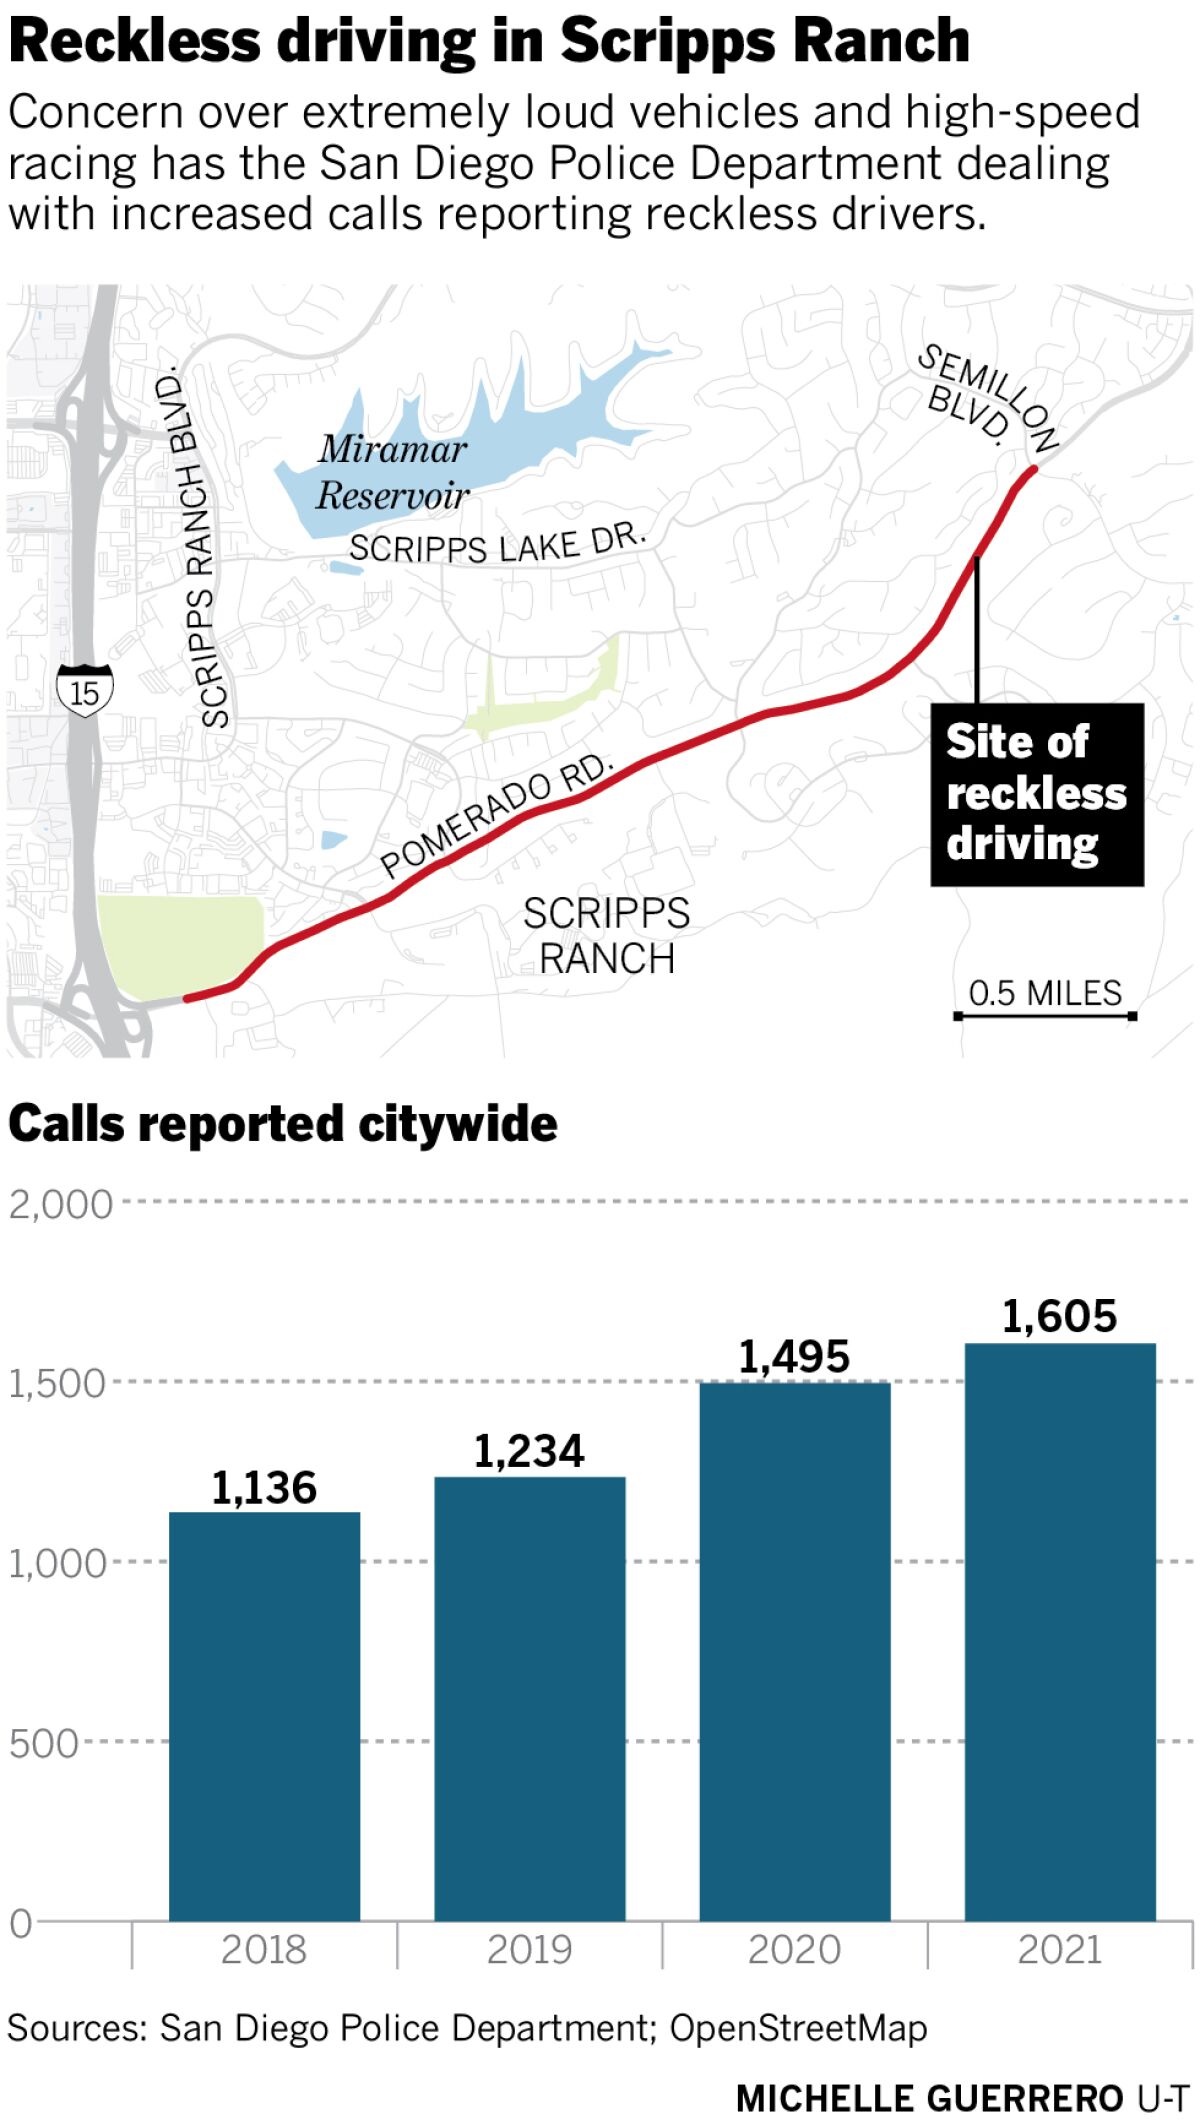 Data shows the San Diego Police Department has seen an increase in reckless driving calls citywide over the last few years.